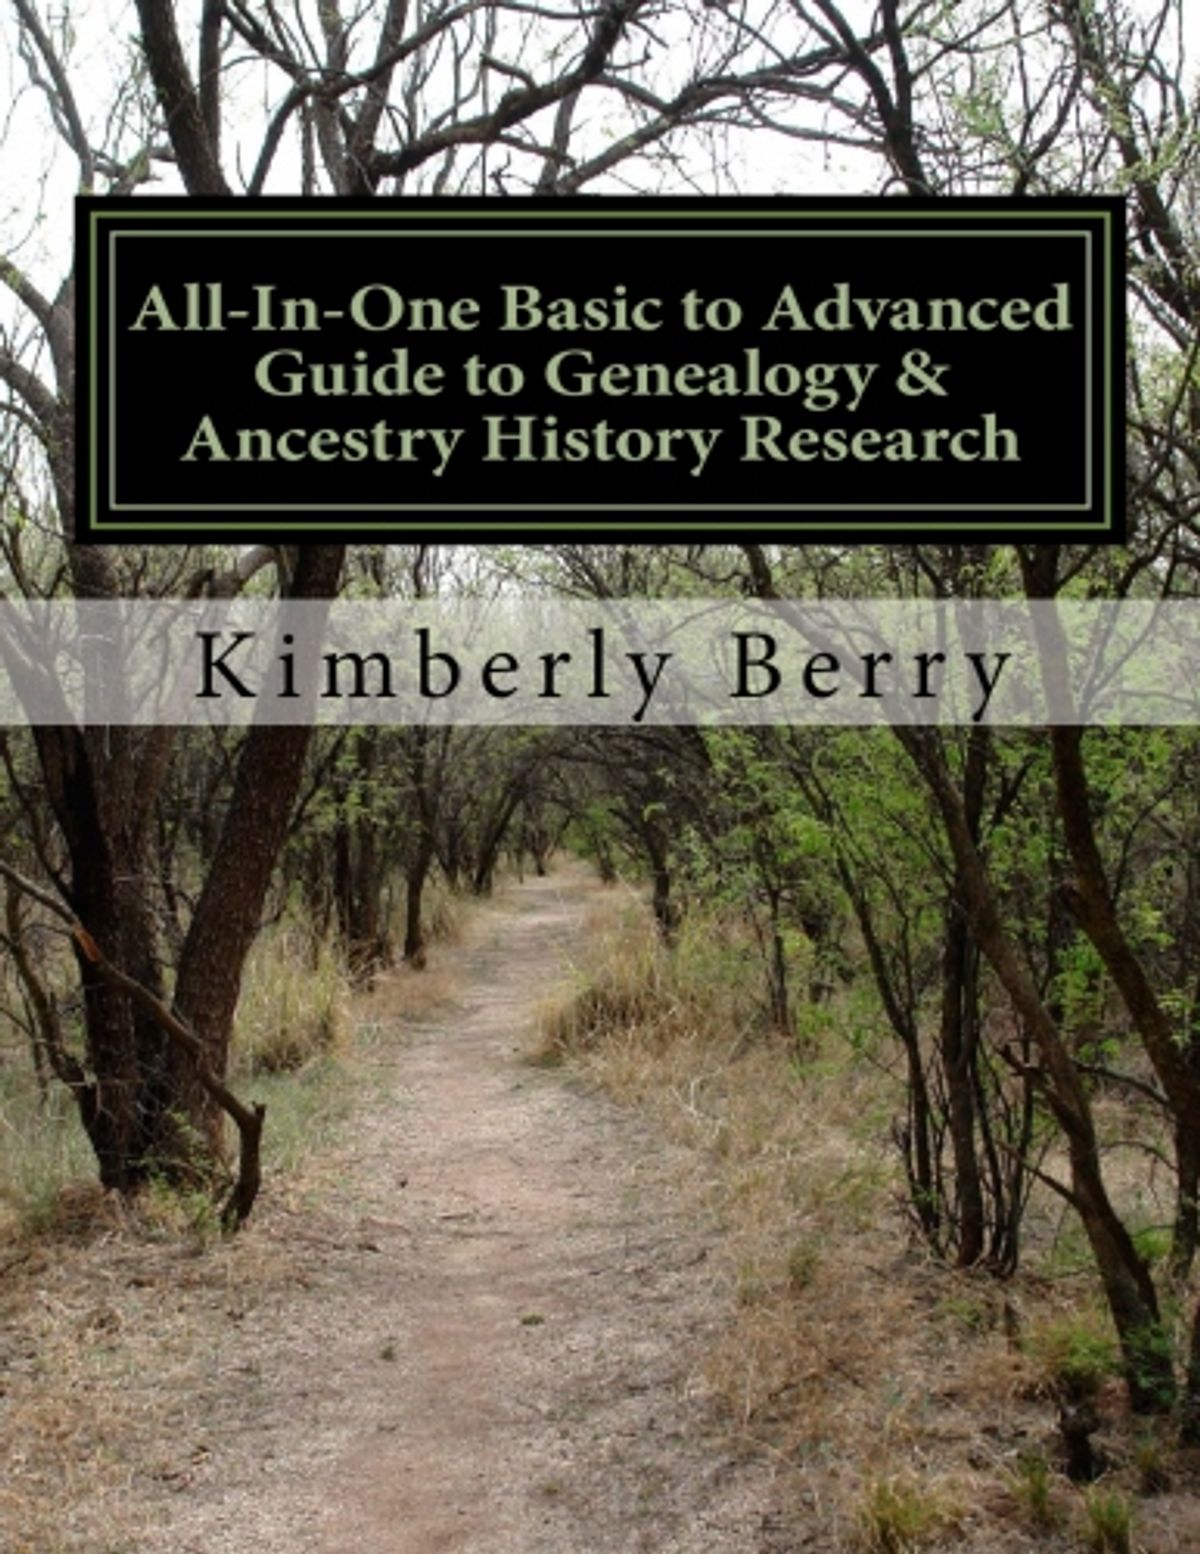 All-In-One Basic to Advanced Guide to Genealogy & Ancestry History Research